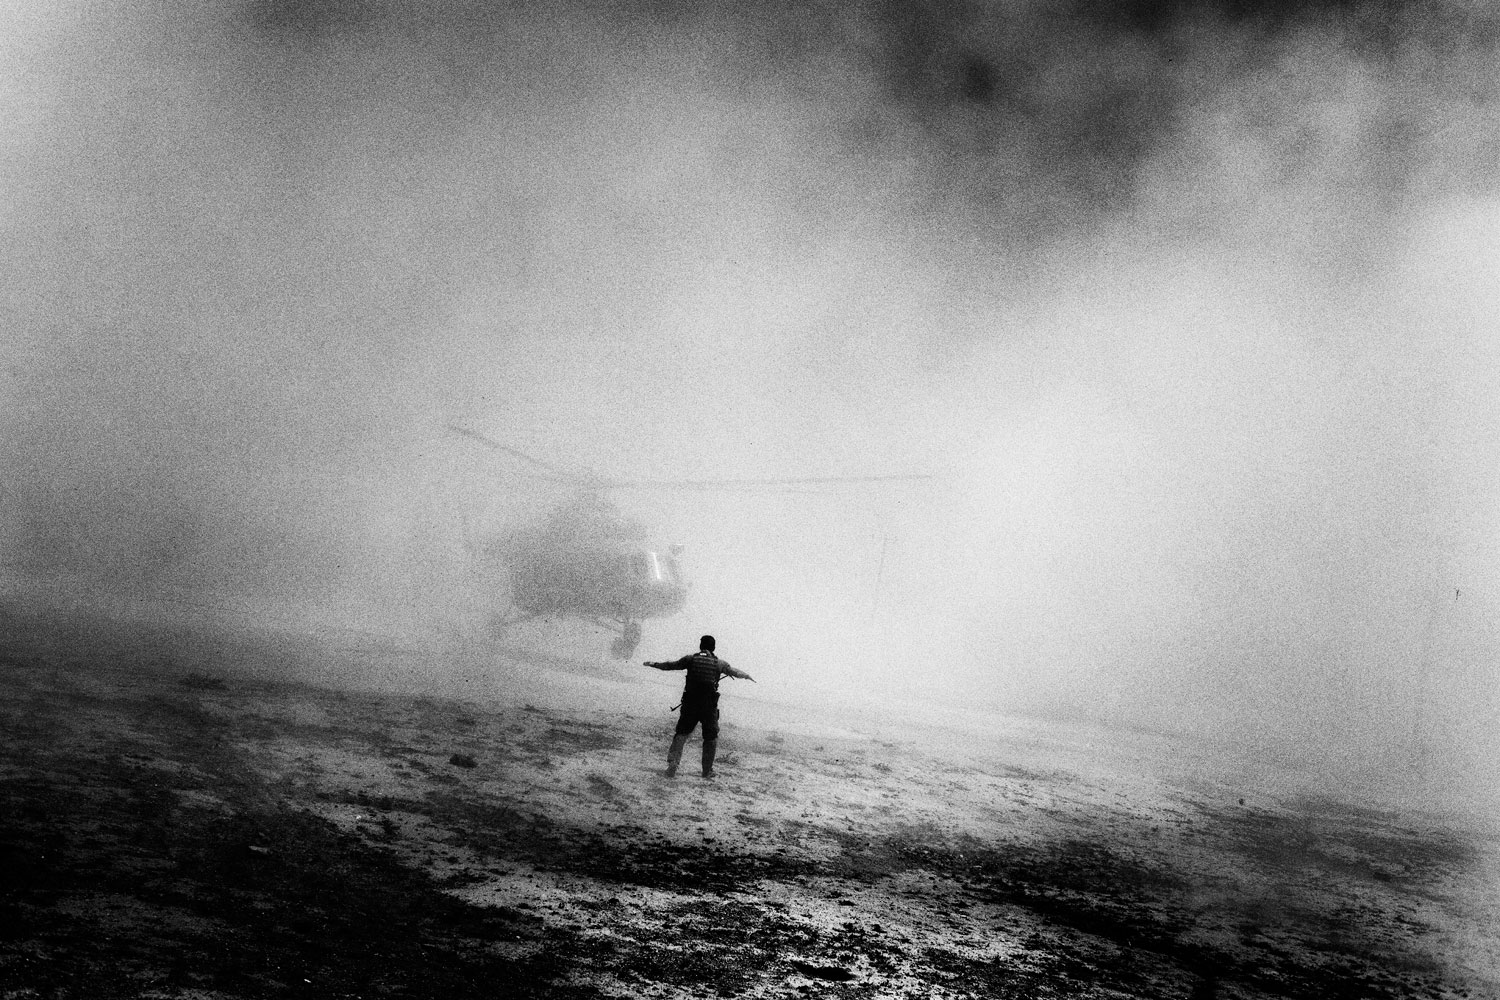 Paolo Pellegrin, May 2006
                               This picture was taken in 2006. It shows a Russian helicopter landing in Kabul to pick up Afghan counter-narcotics troops and American DEA agents. They had received a tip from an informant and their mission was to assault a village in the rugged mountains near Jalalabad to bust opium laboratories possibly tied to the Taliban network. The assault was carefully staged both by land and air forces but in the end though just one low-level arrest was made and a small bag of hashish seized. The opium labs, if they were ever there in the first place, vanished.